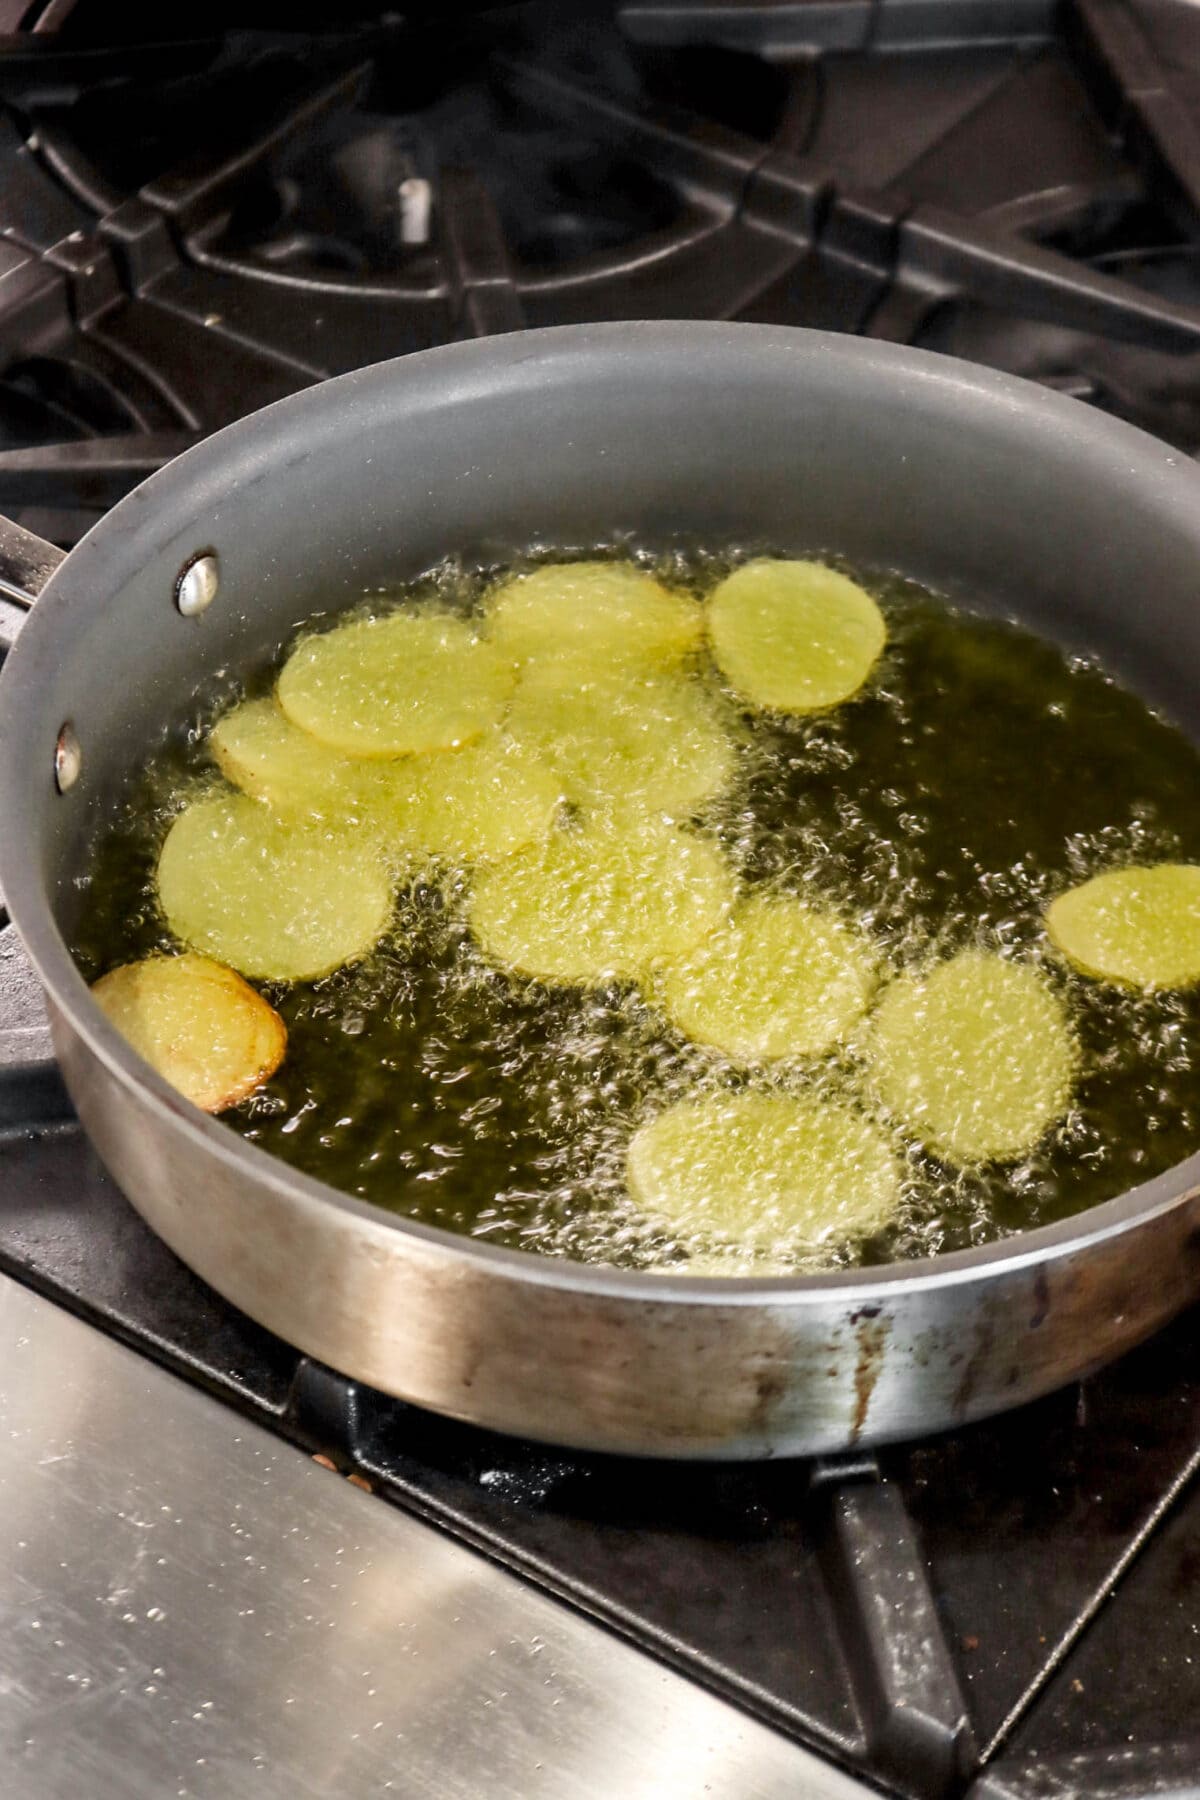 potato slices being fried in small pot